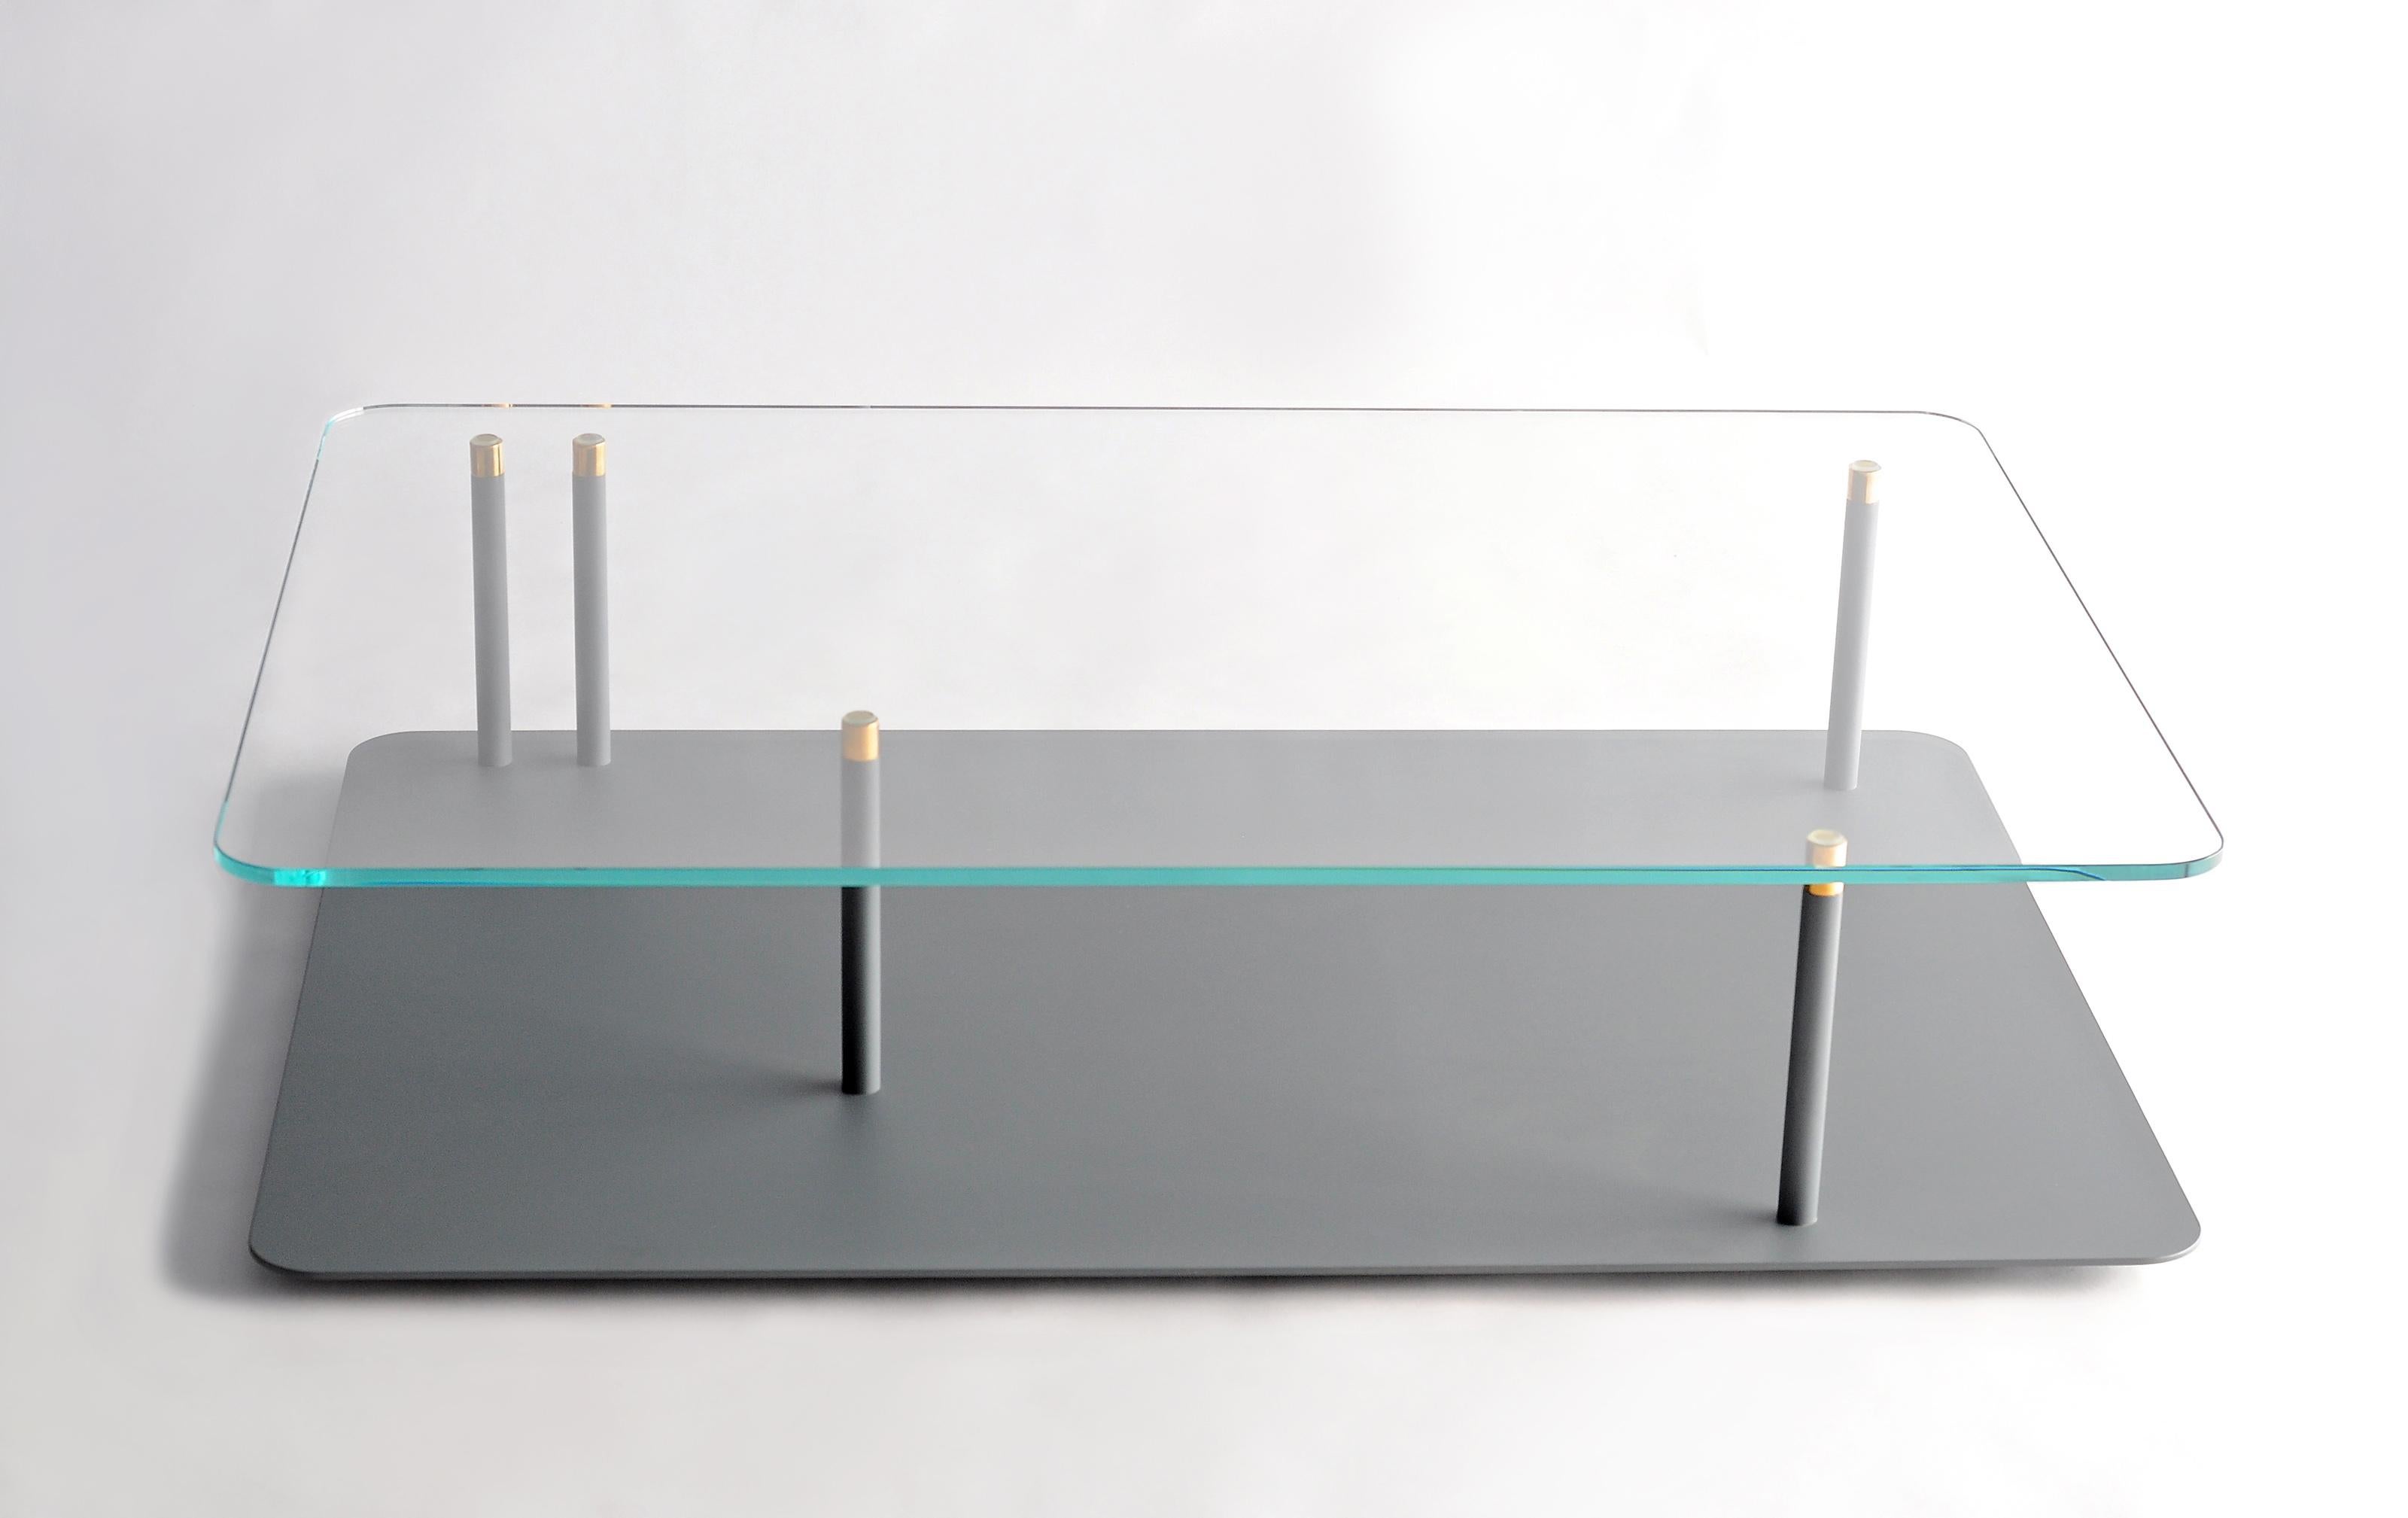 Points of Interest Rectangular Coffee Table by Phase Design
Dimensions: D 96.5 x W 88.9 x H 29.2 cm. 
Materials: Powder-coated steel, glass and brass.

Powder-coated steel base with solid brass tips and available with starphire glass top. Powder